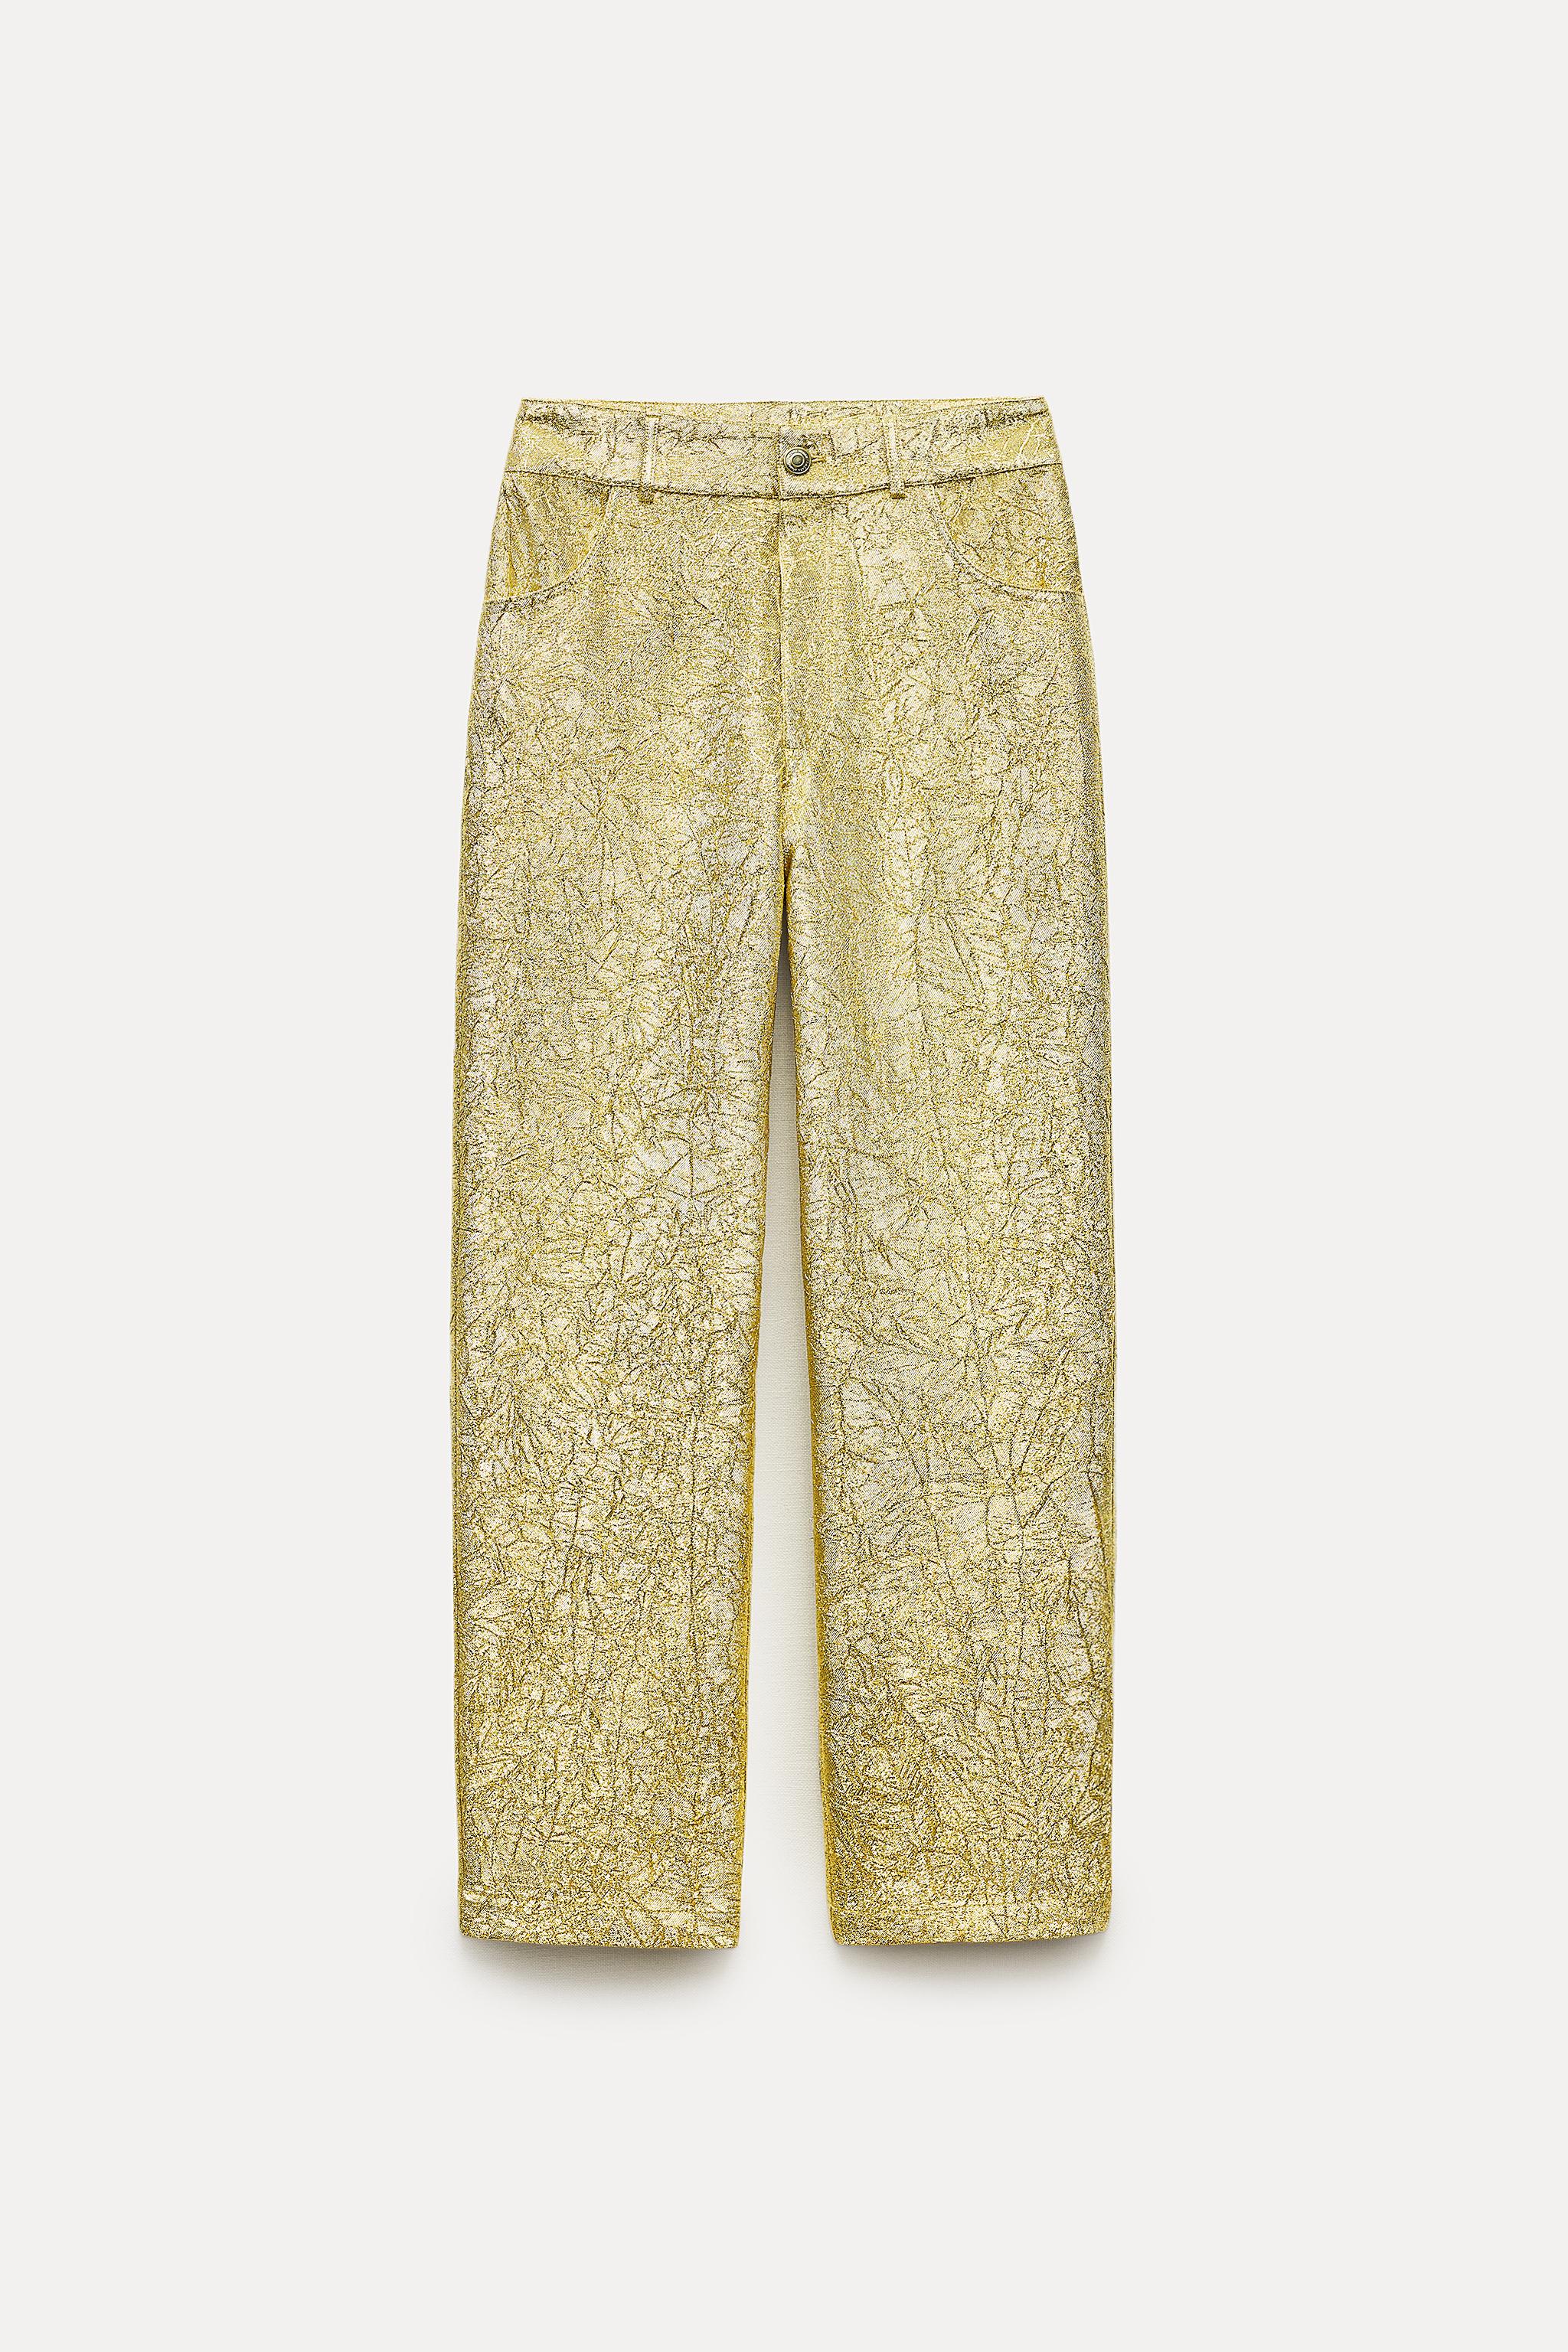 SHINY PANTS ZW COLLECTION